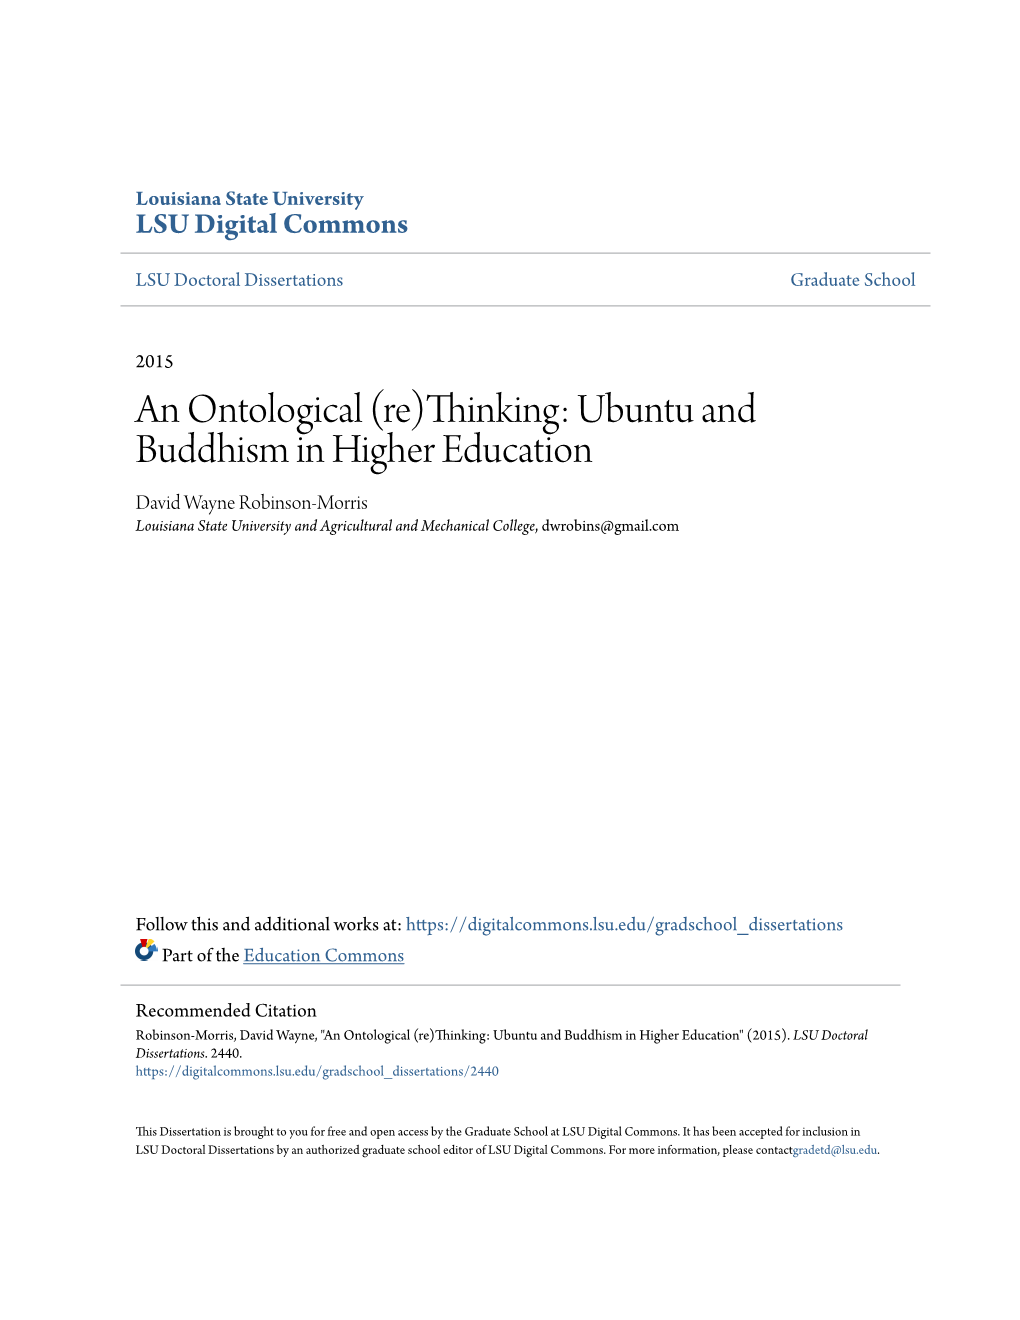 An Ontological (Re)Thinking: Ubuntu and Buddhism in Higher Education